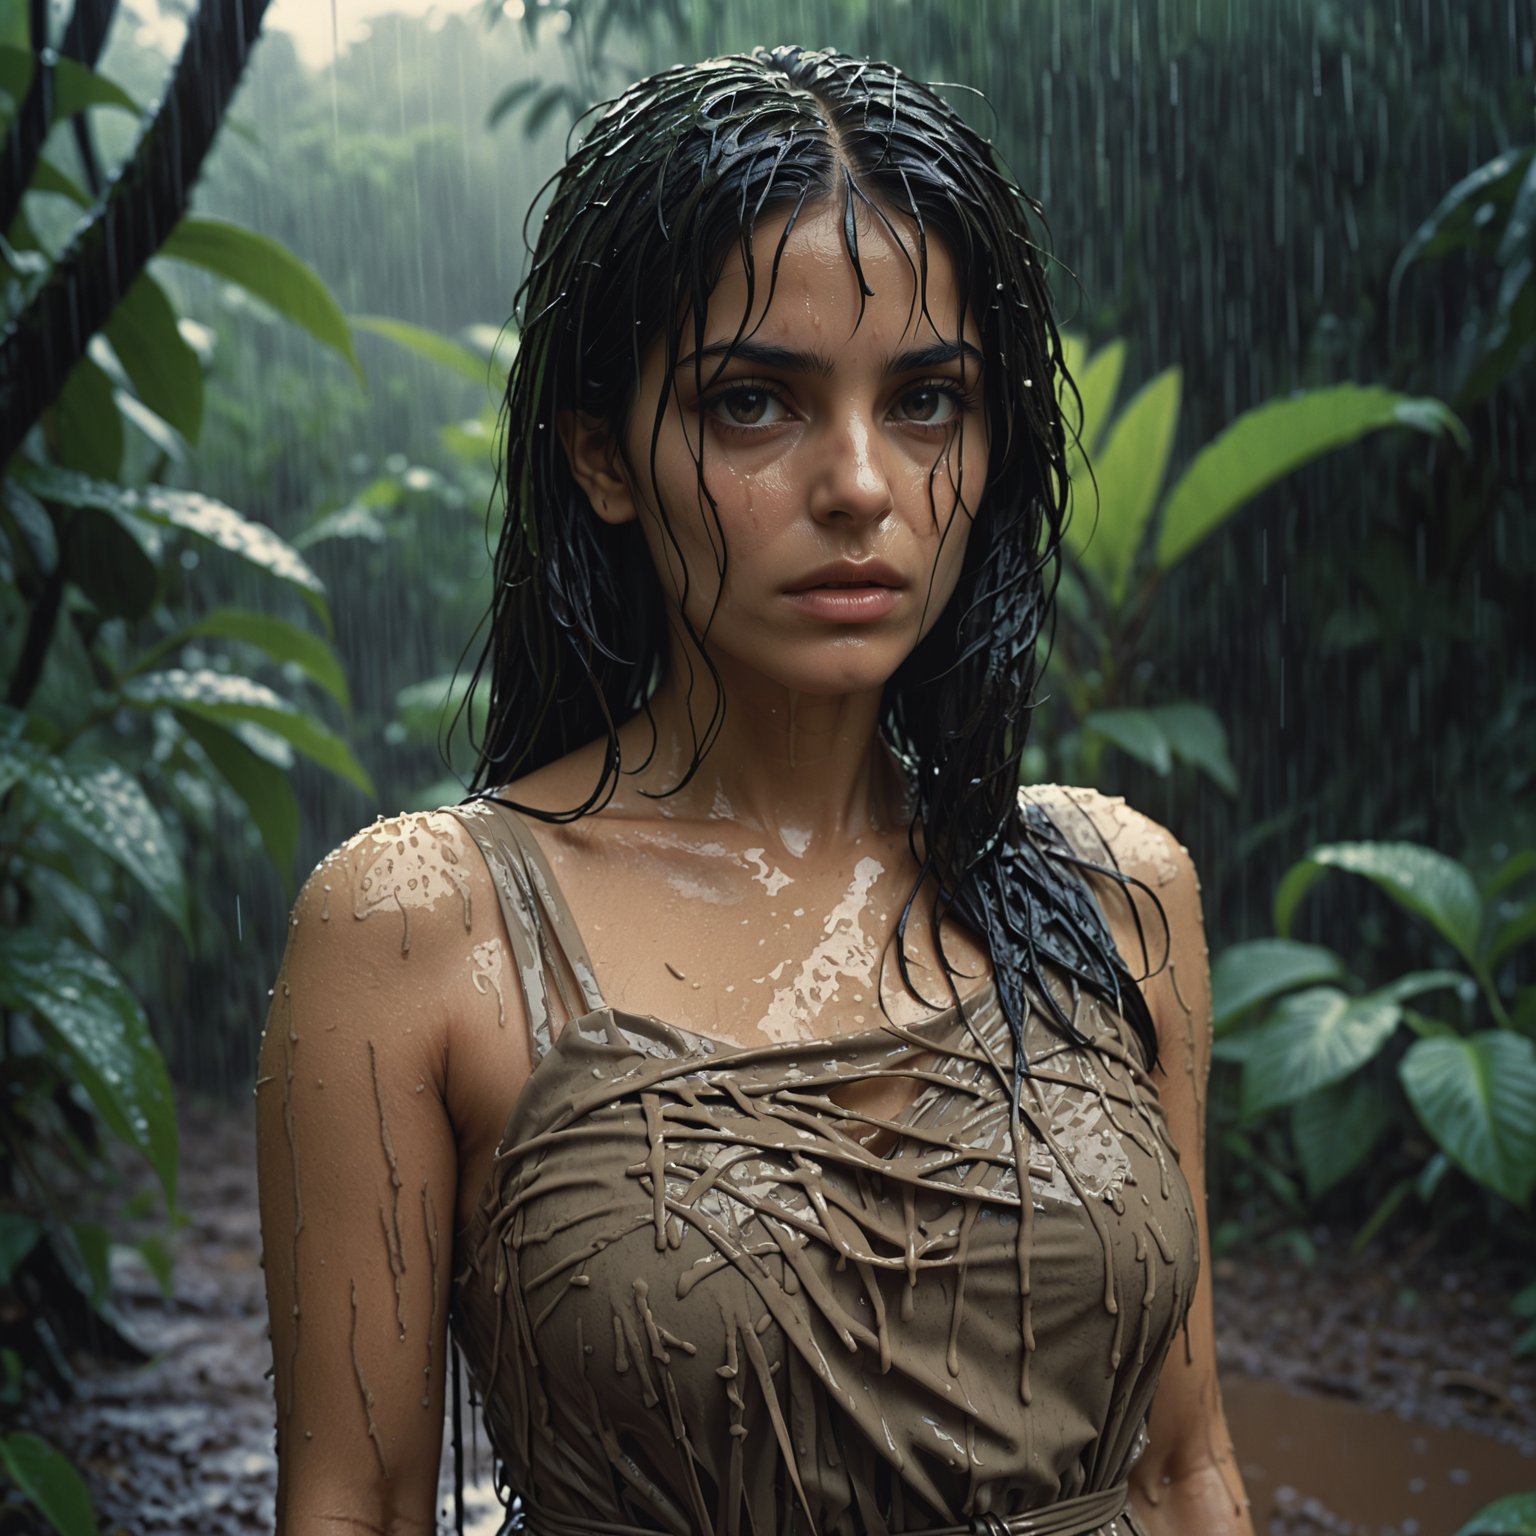 Hyperrealistic art portrait, close up, Persian Female wearing shredded dress, masterpiece, sad, focus on face, outside, scenic, overgrown jungle, raining, wet, dirt, mud, cinemascope, moody, epic, OverallDetail, gorgeous, 2000s vintage RAW photo . Extremely high-resolution details, photographic, realism pushed to extreme, fine texture, incredibly lifelike